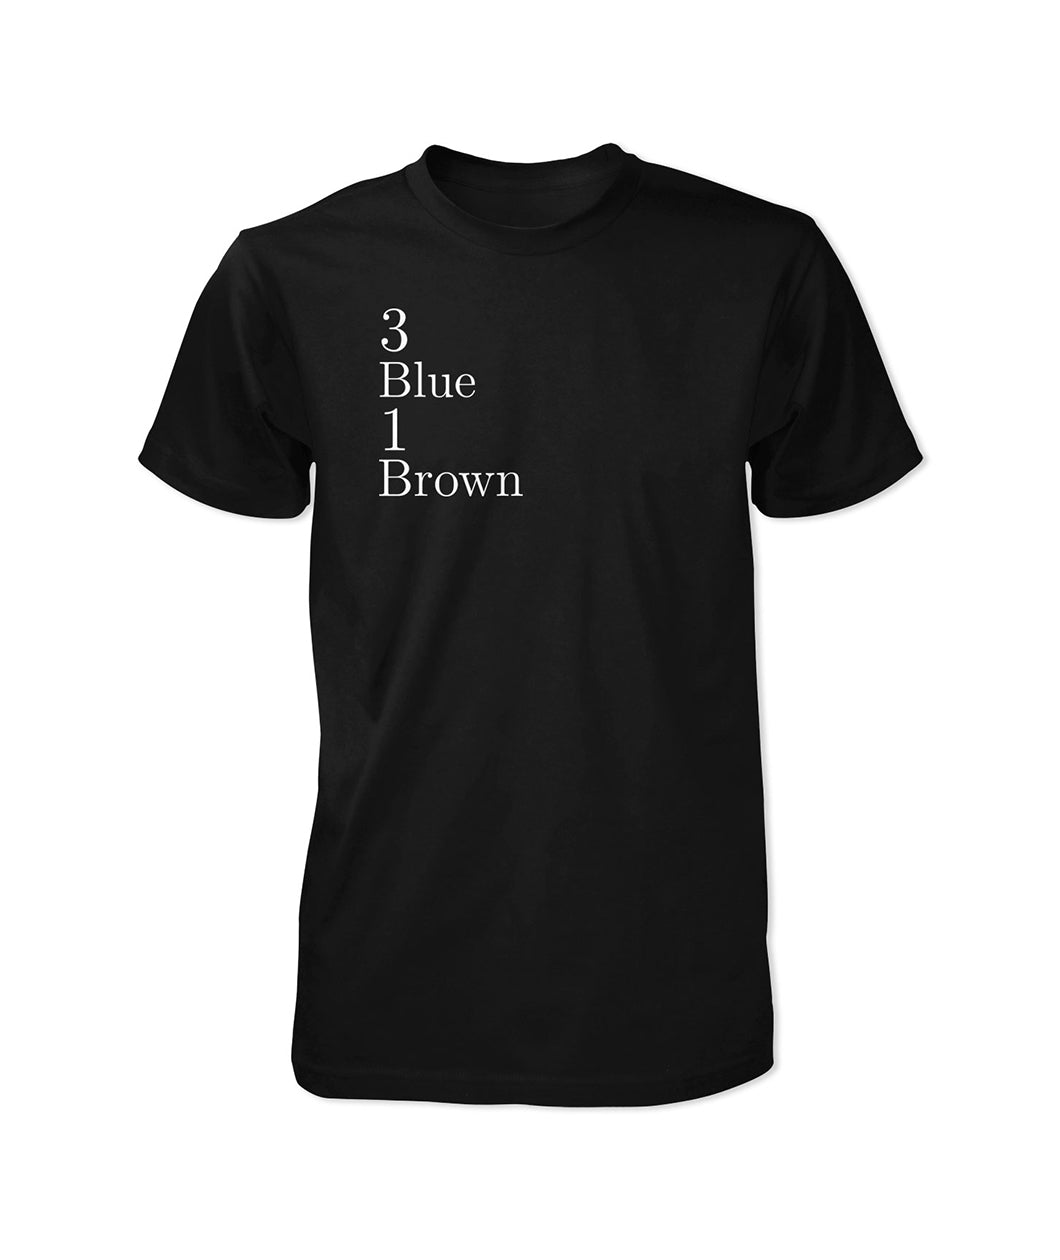 Black t-shirt with 